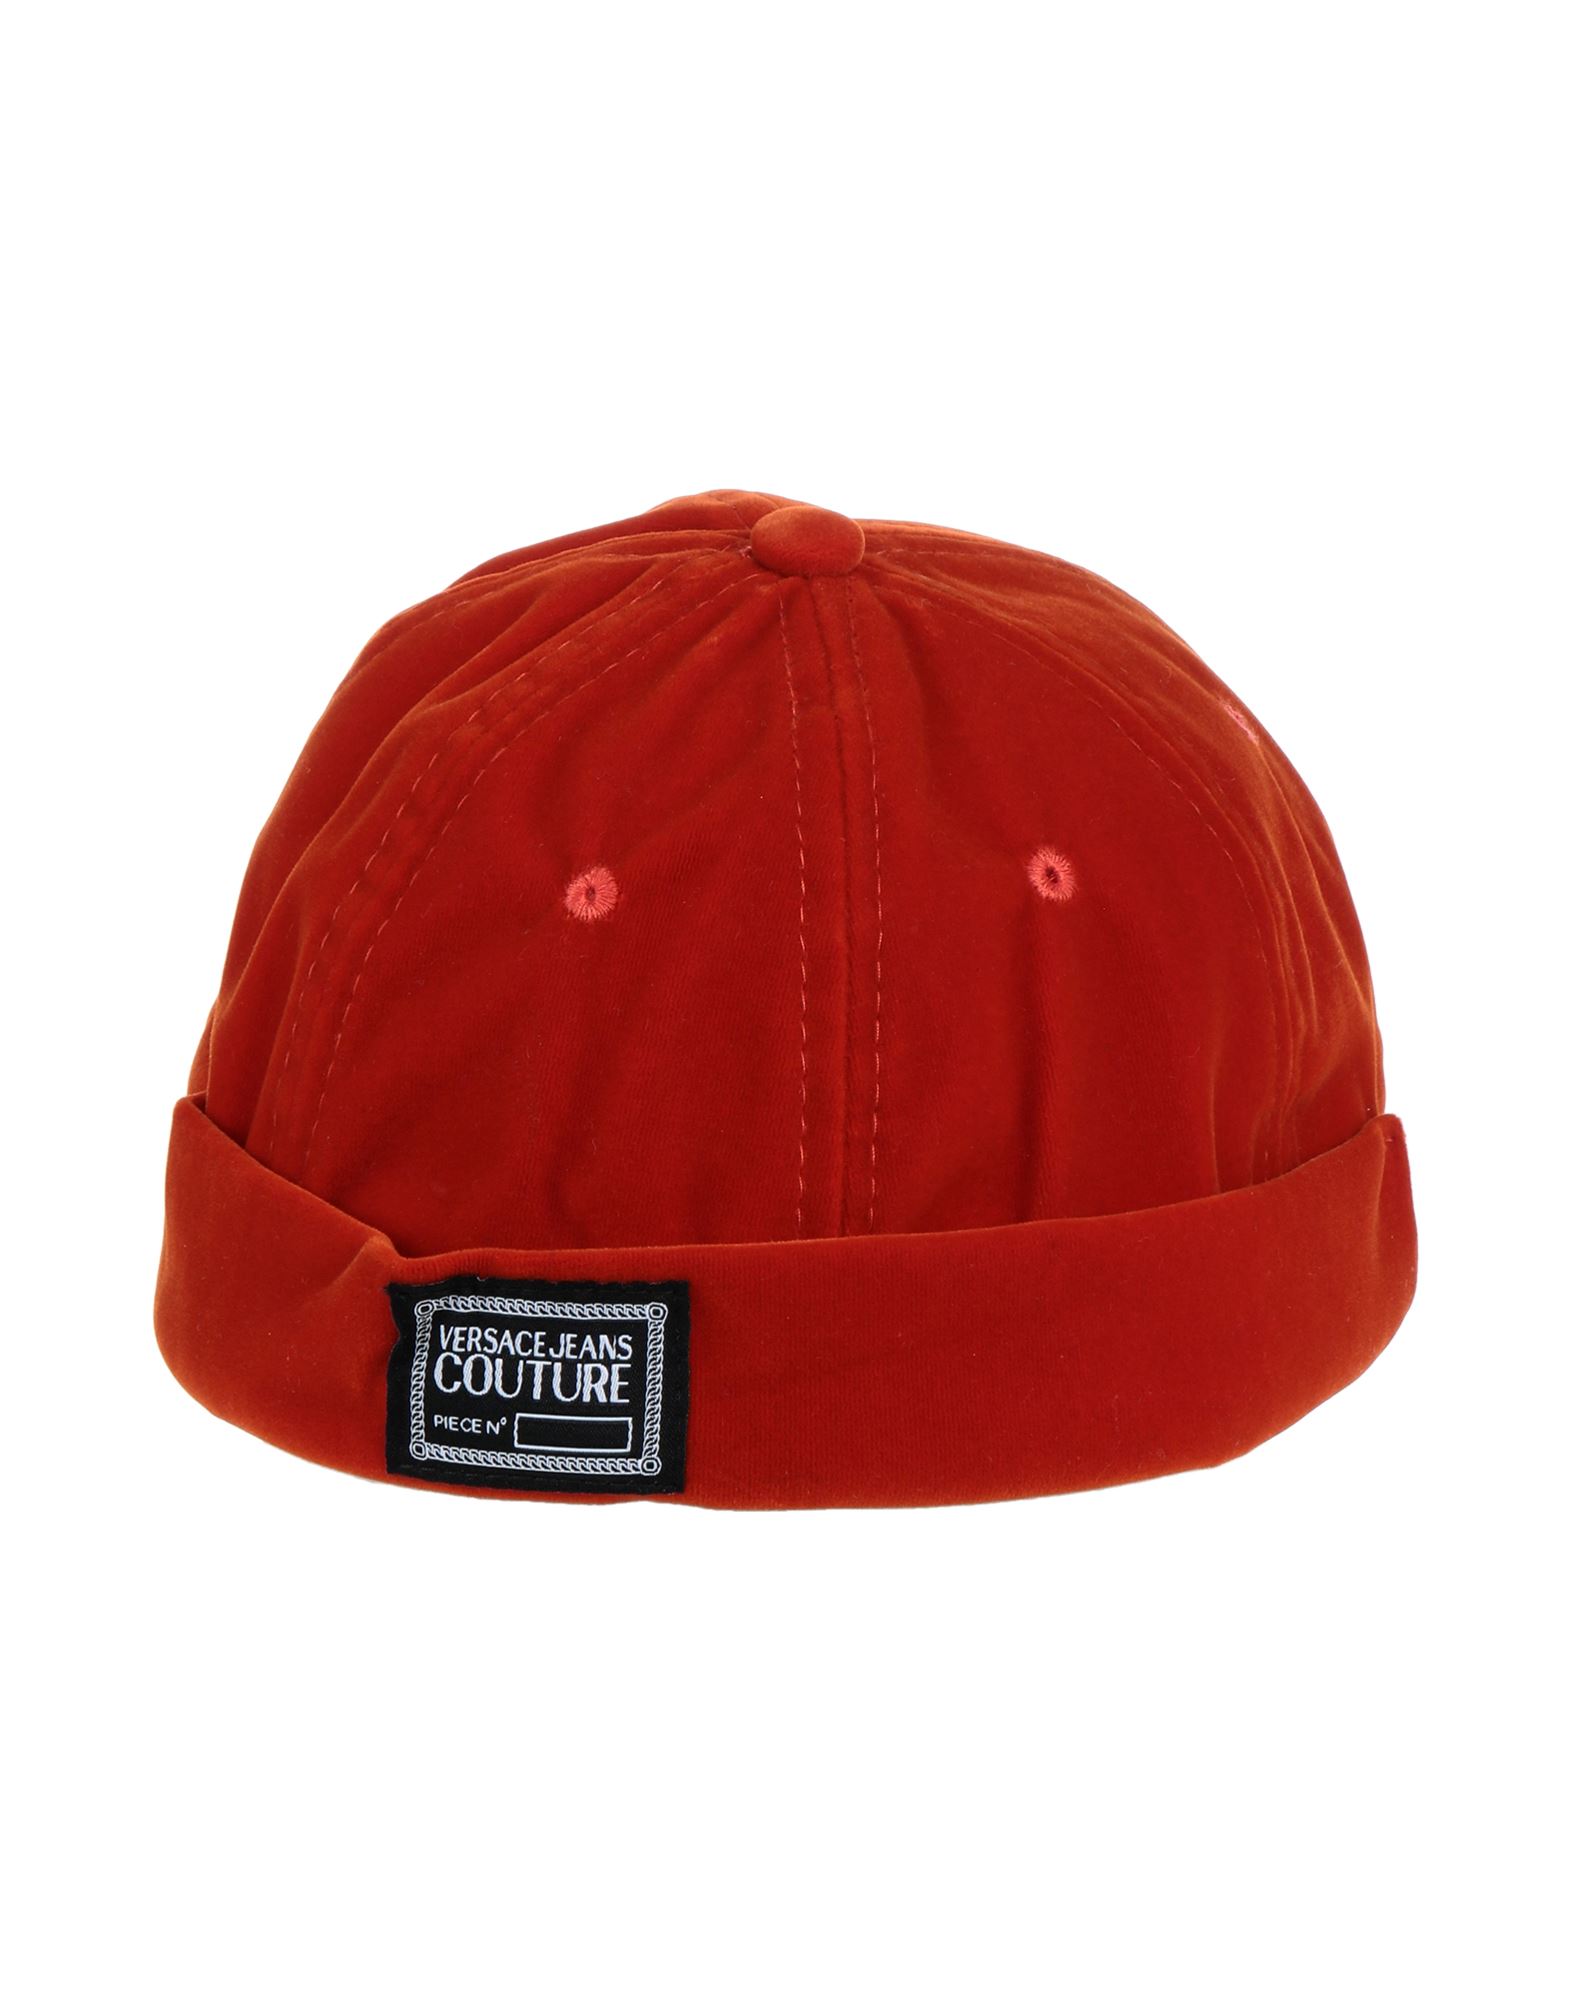 Versace Jeans Couture Hats In Red